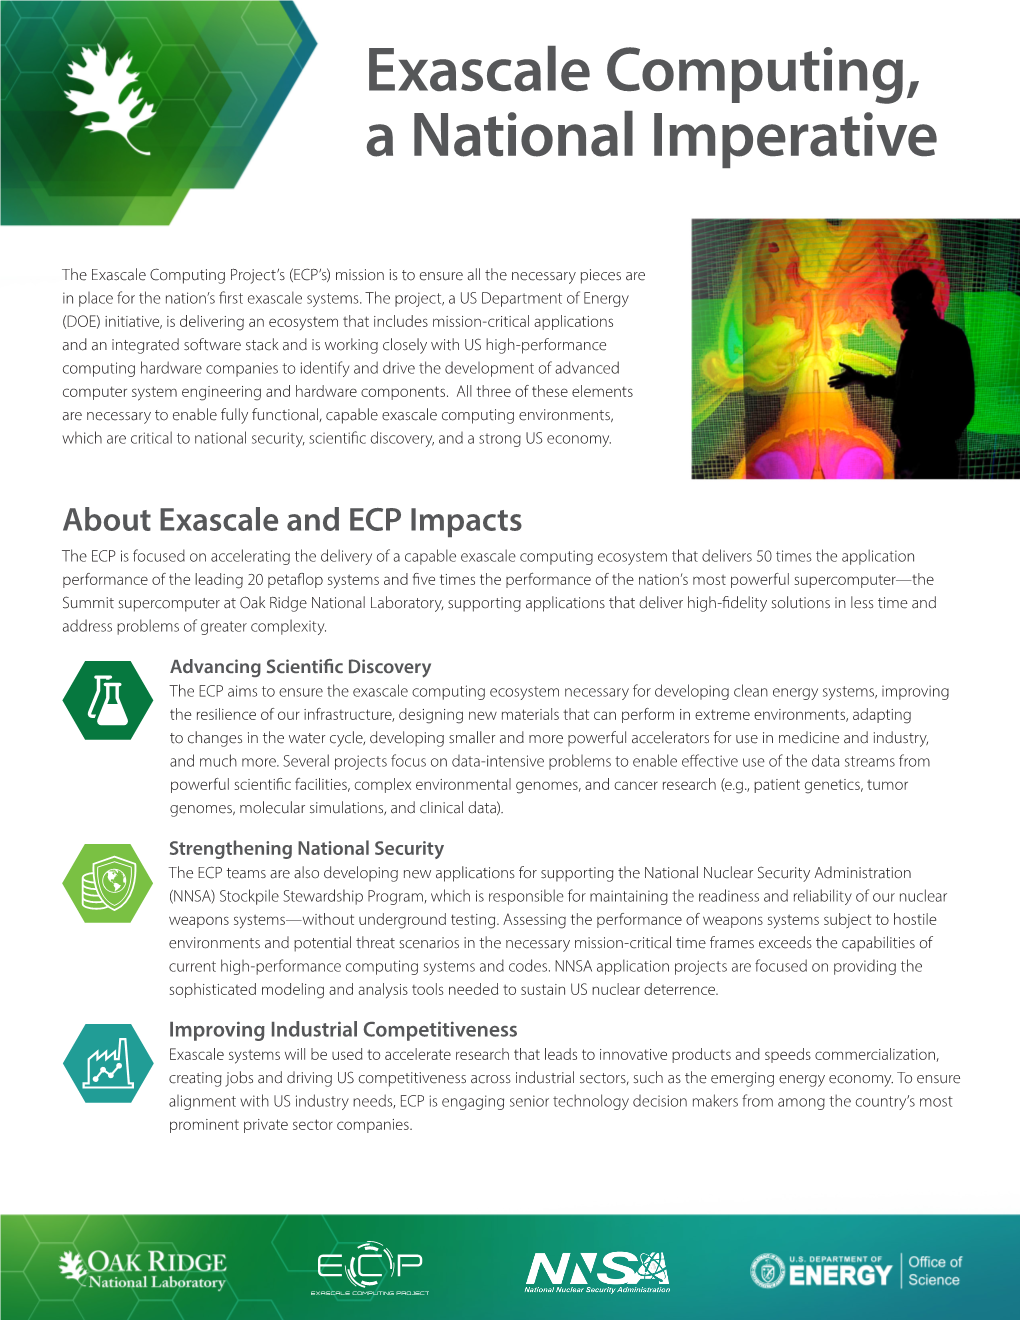 Exascale Computing Project’S (ECP’S) Mission Is to Ensure All the Necessary Pieces Are in Place for the Nation’S First Exascale Systems